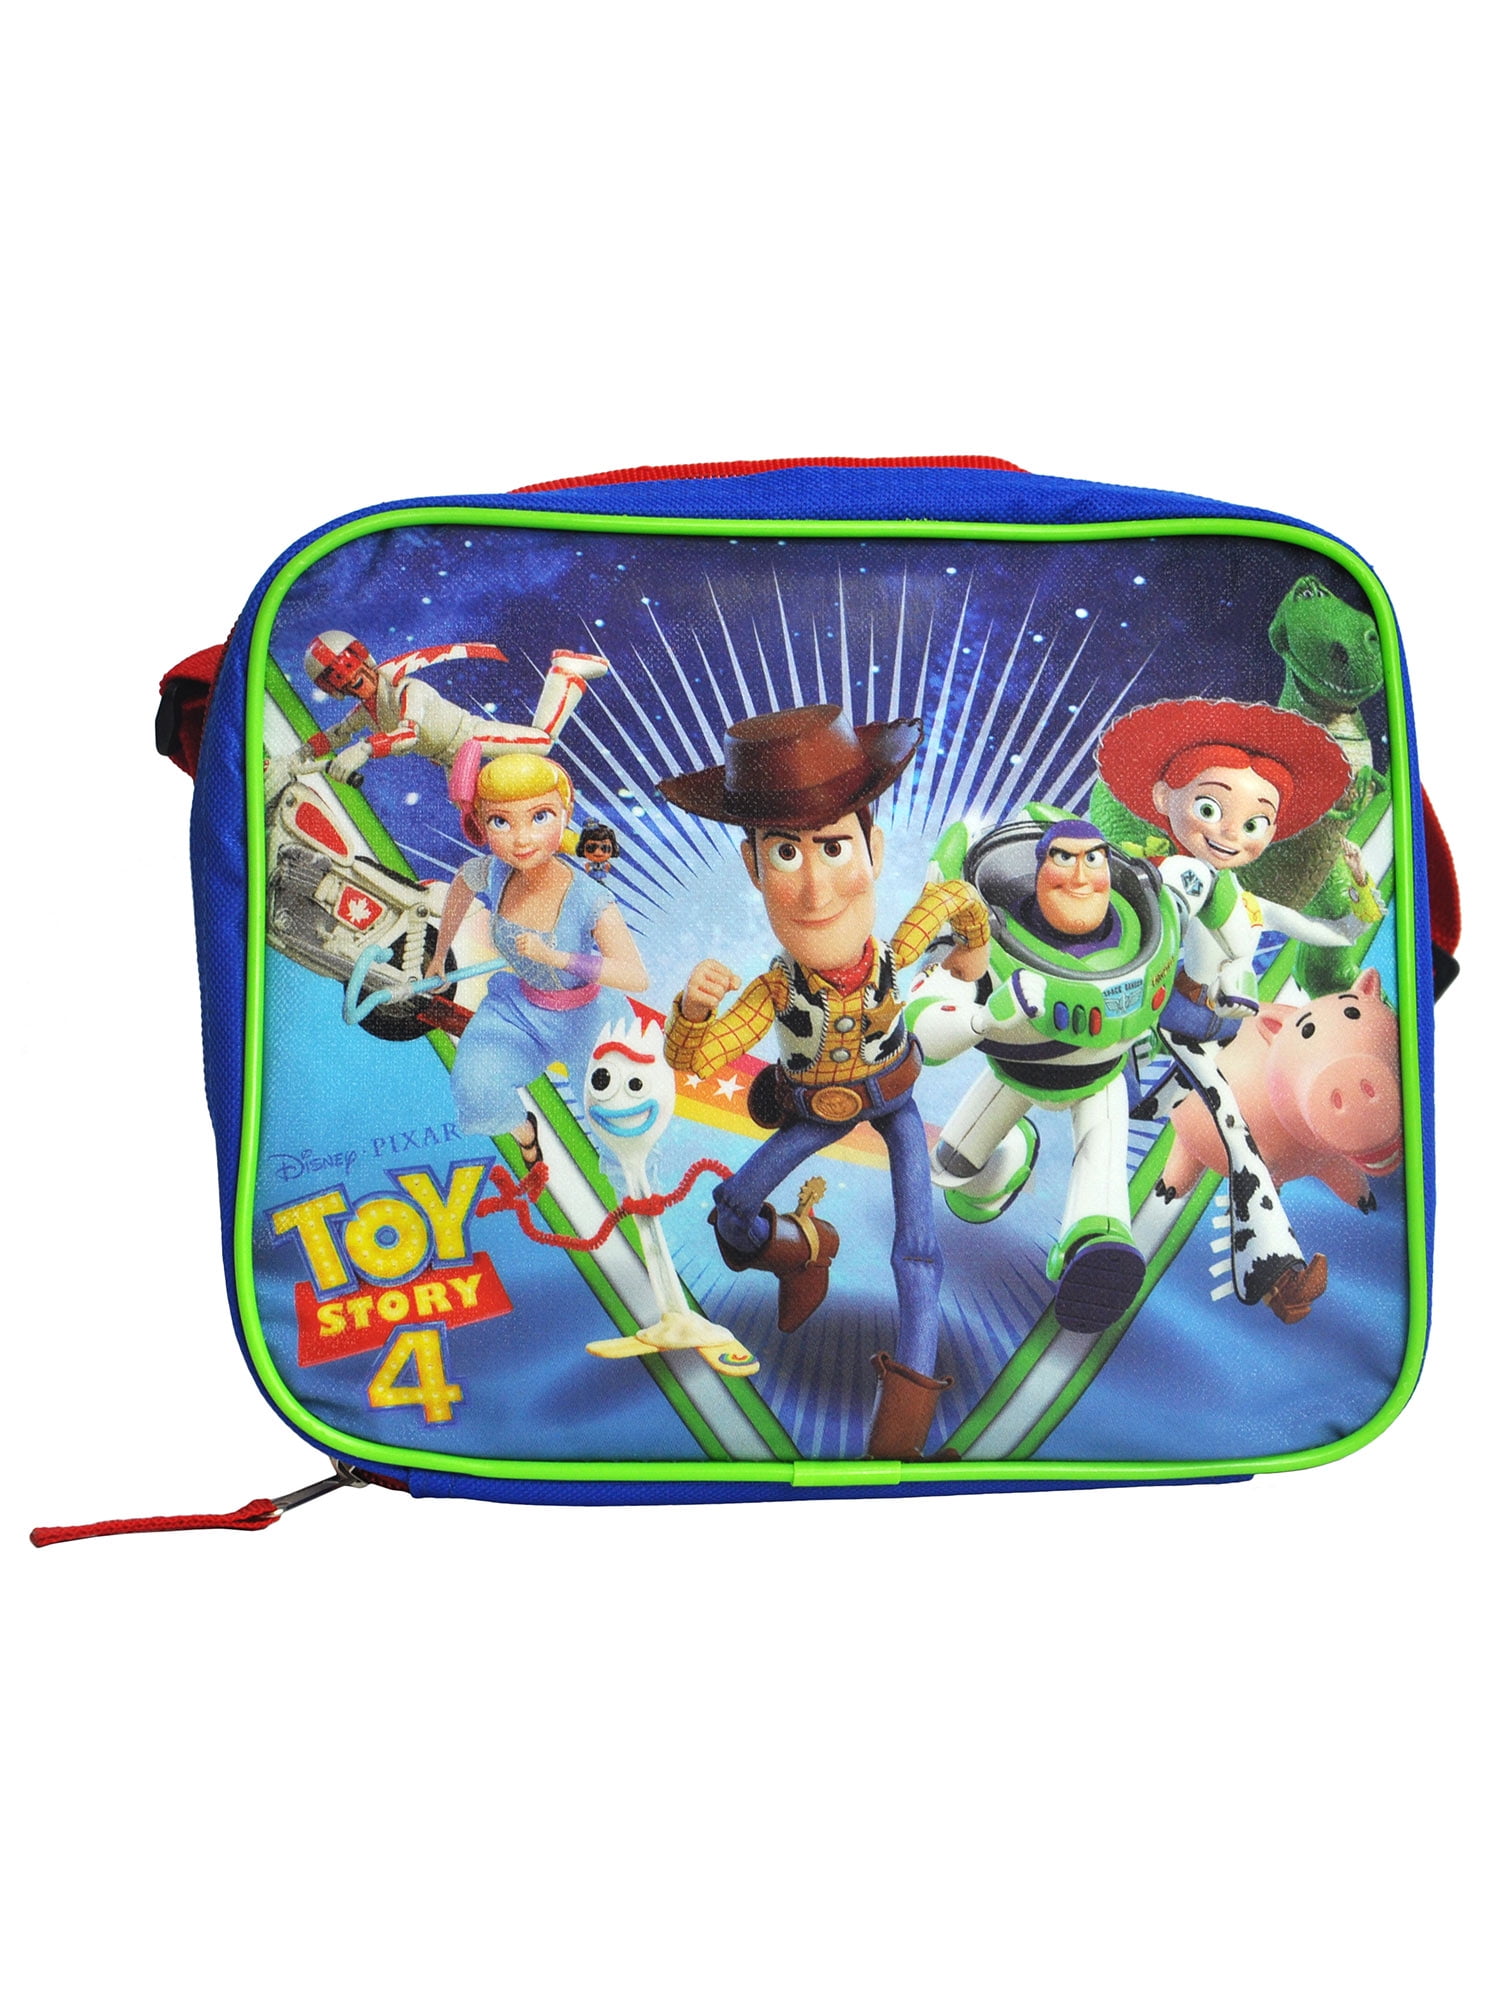 Toy Story Single Compartment Soft Insulated Lunch Bag No Toy Gets Left  Behind with 3-D Image of Buzz Lightyear, Woody, Rex, Bullseye and Slinky Dog